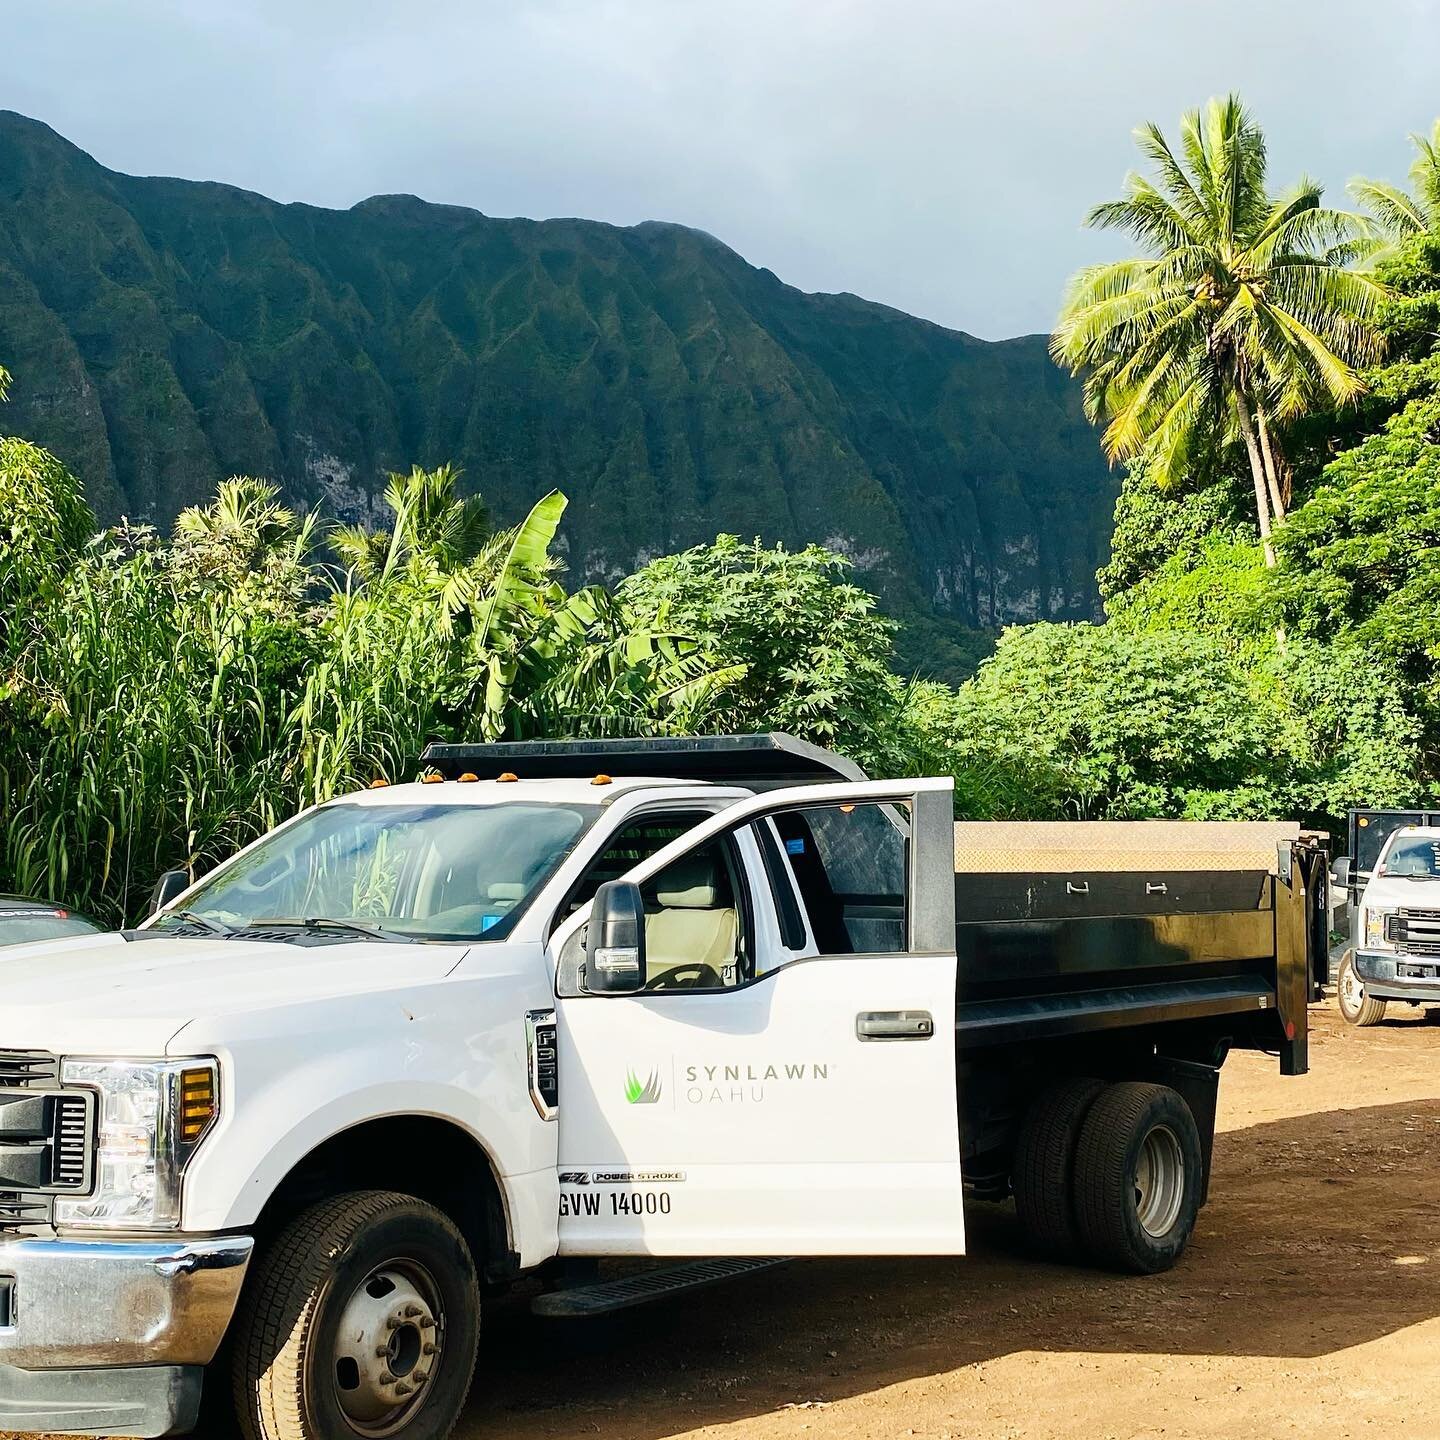 Morning views 💚 #5931864 #SYNlawnOahu#hawaiilandscaping #SyntheticTurf #ArtificialGrass #Turf #Grass #SynLawn #lifetimewarranty #biobasedproducts #savewater #savetime #getyourweekendsback #alohaeveryday